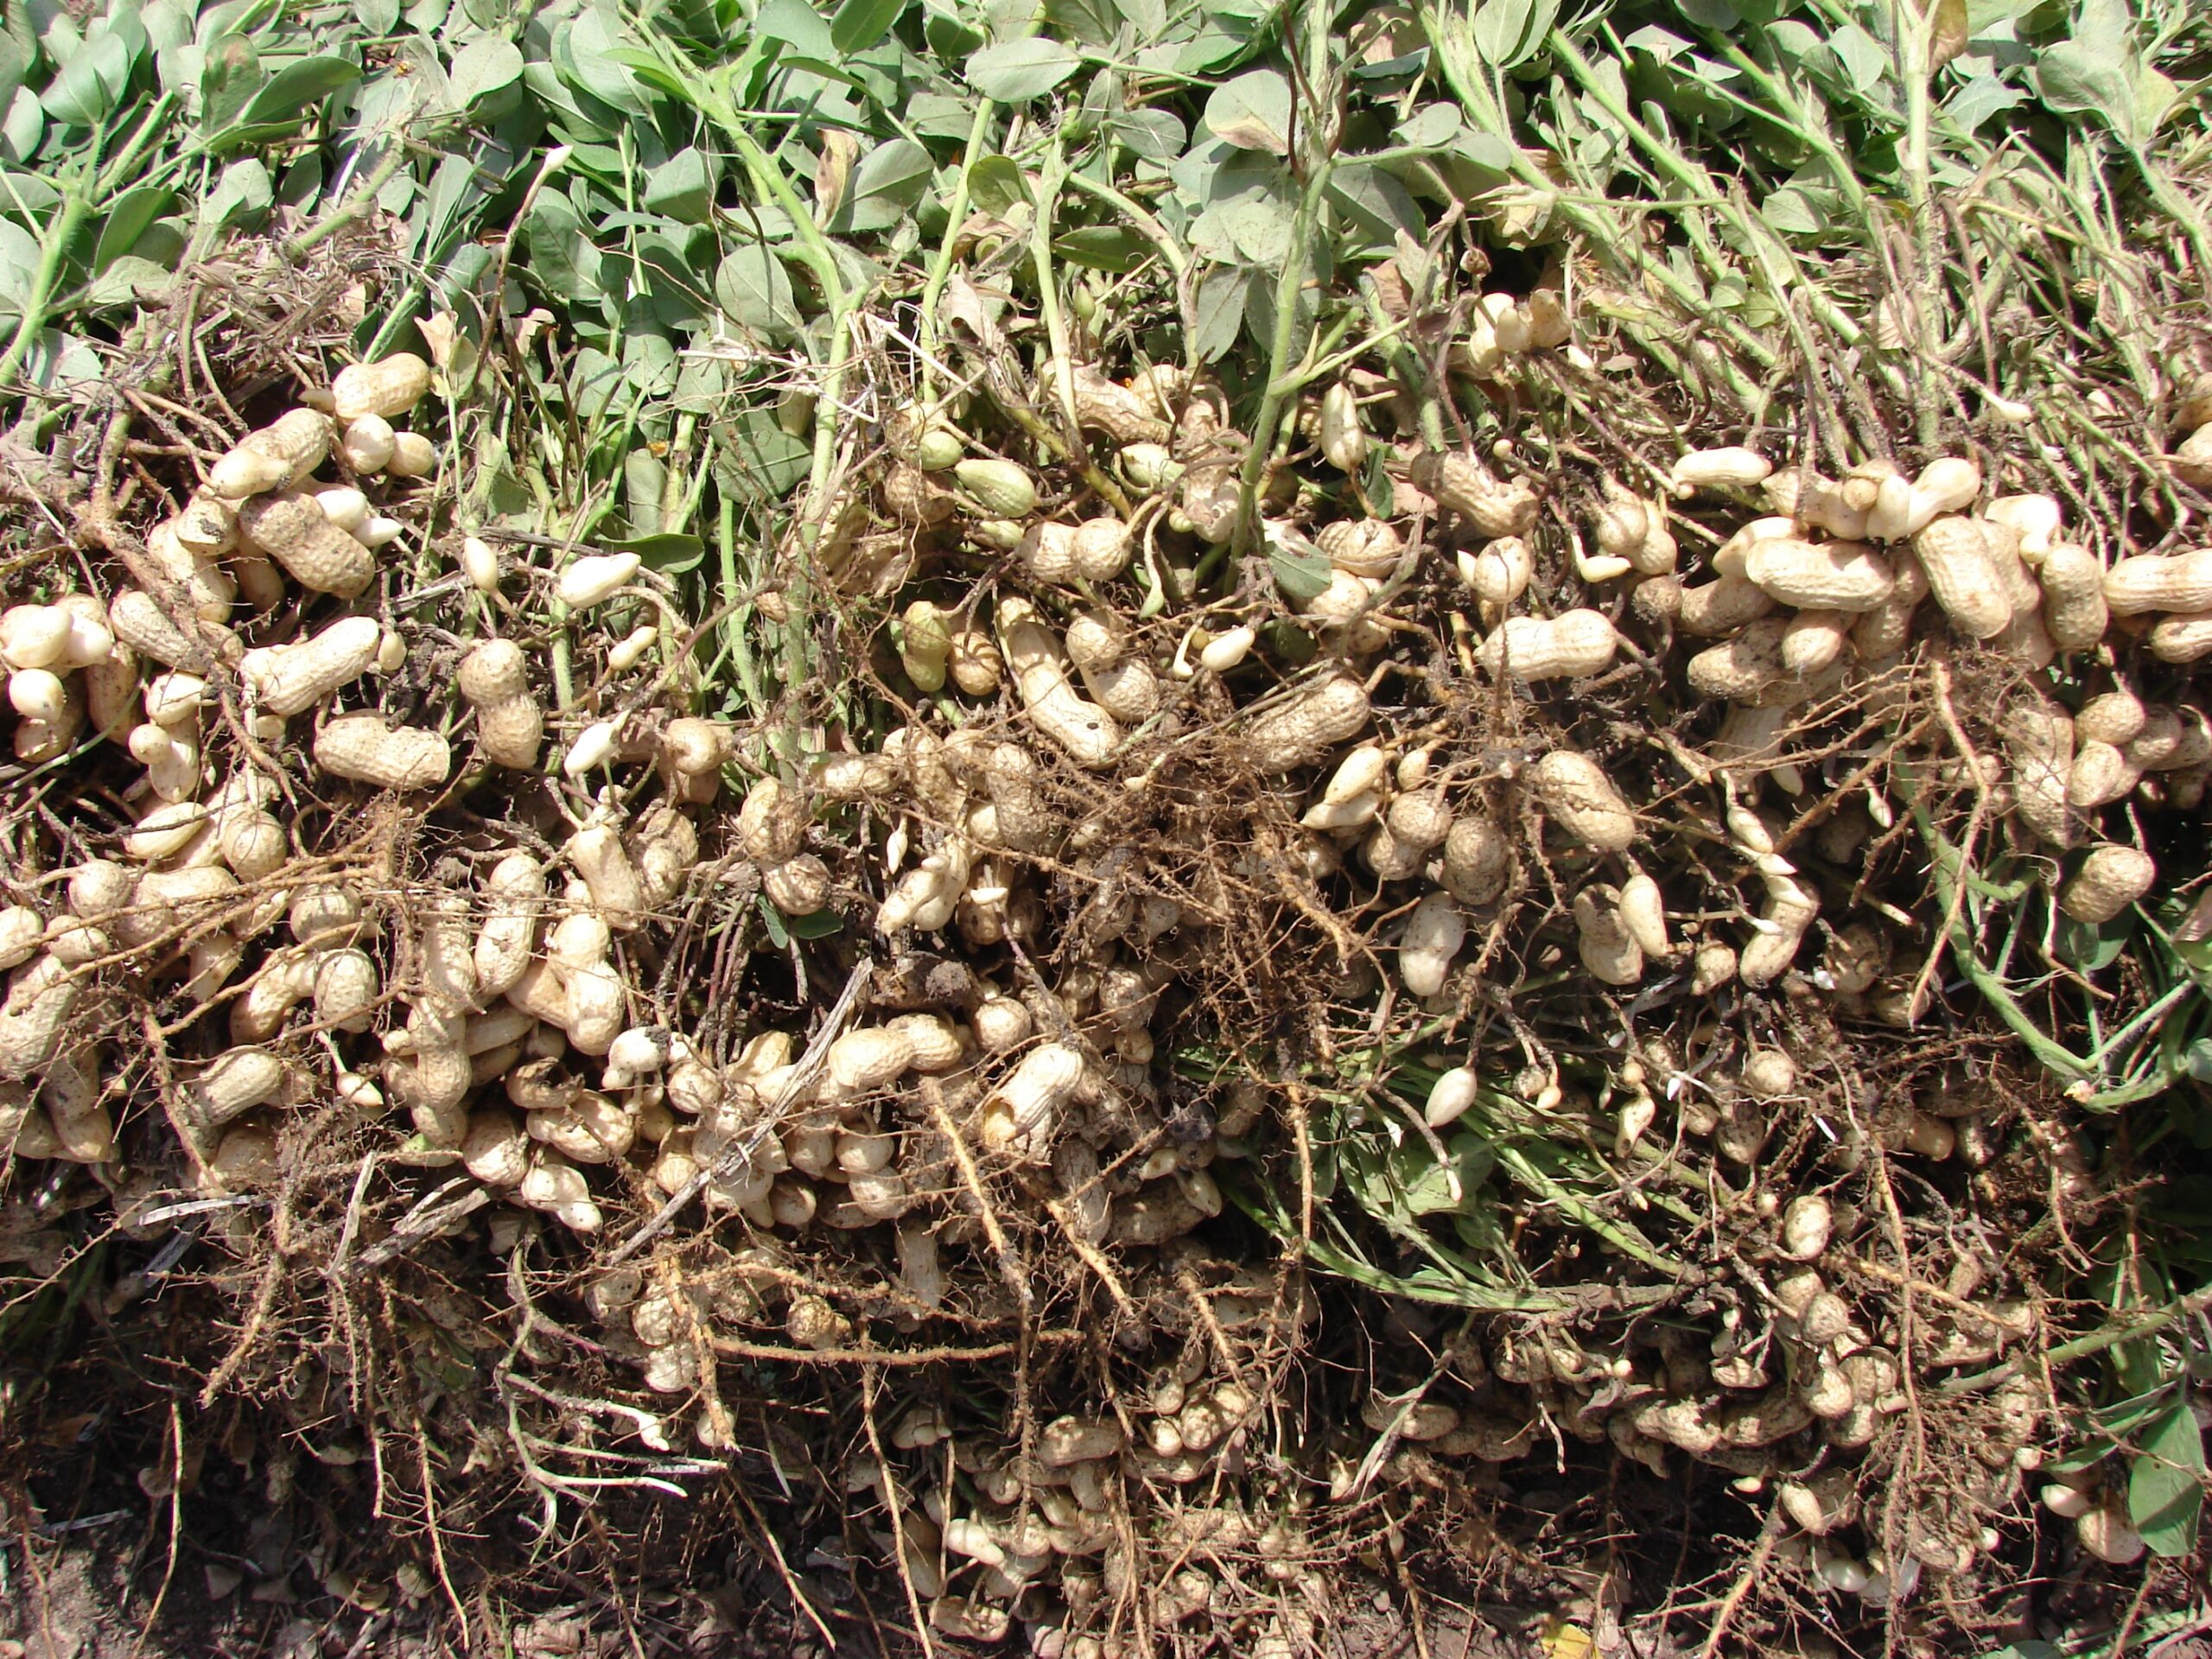 Groundnuts during harvest